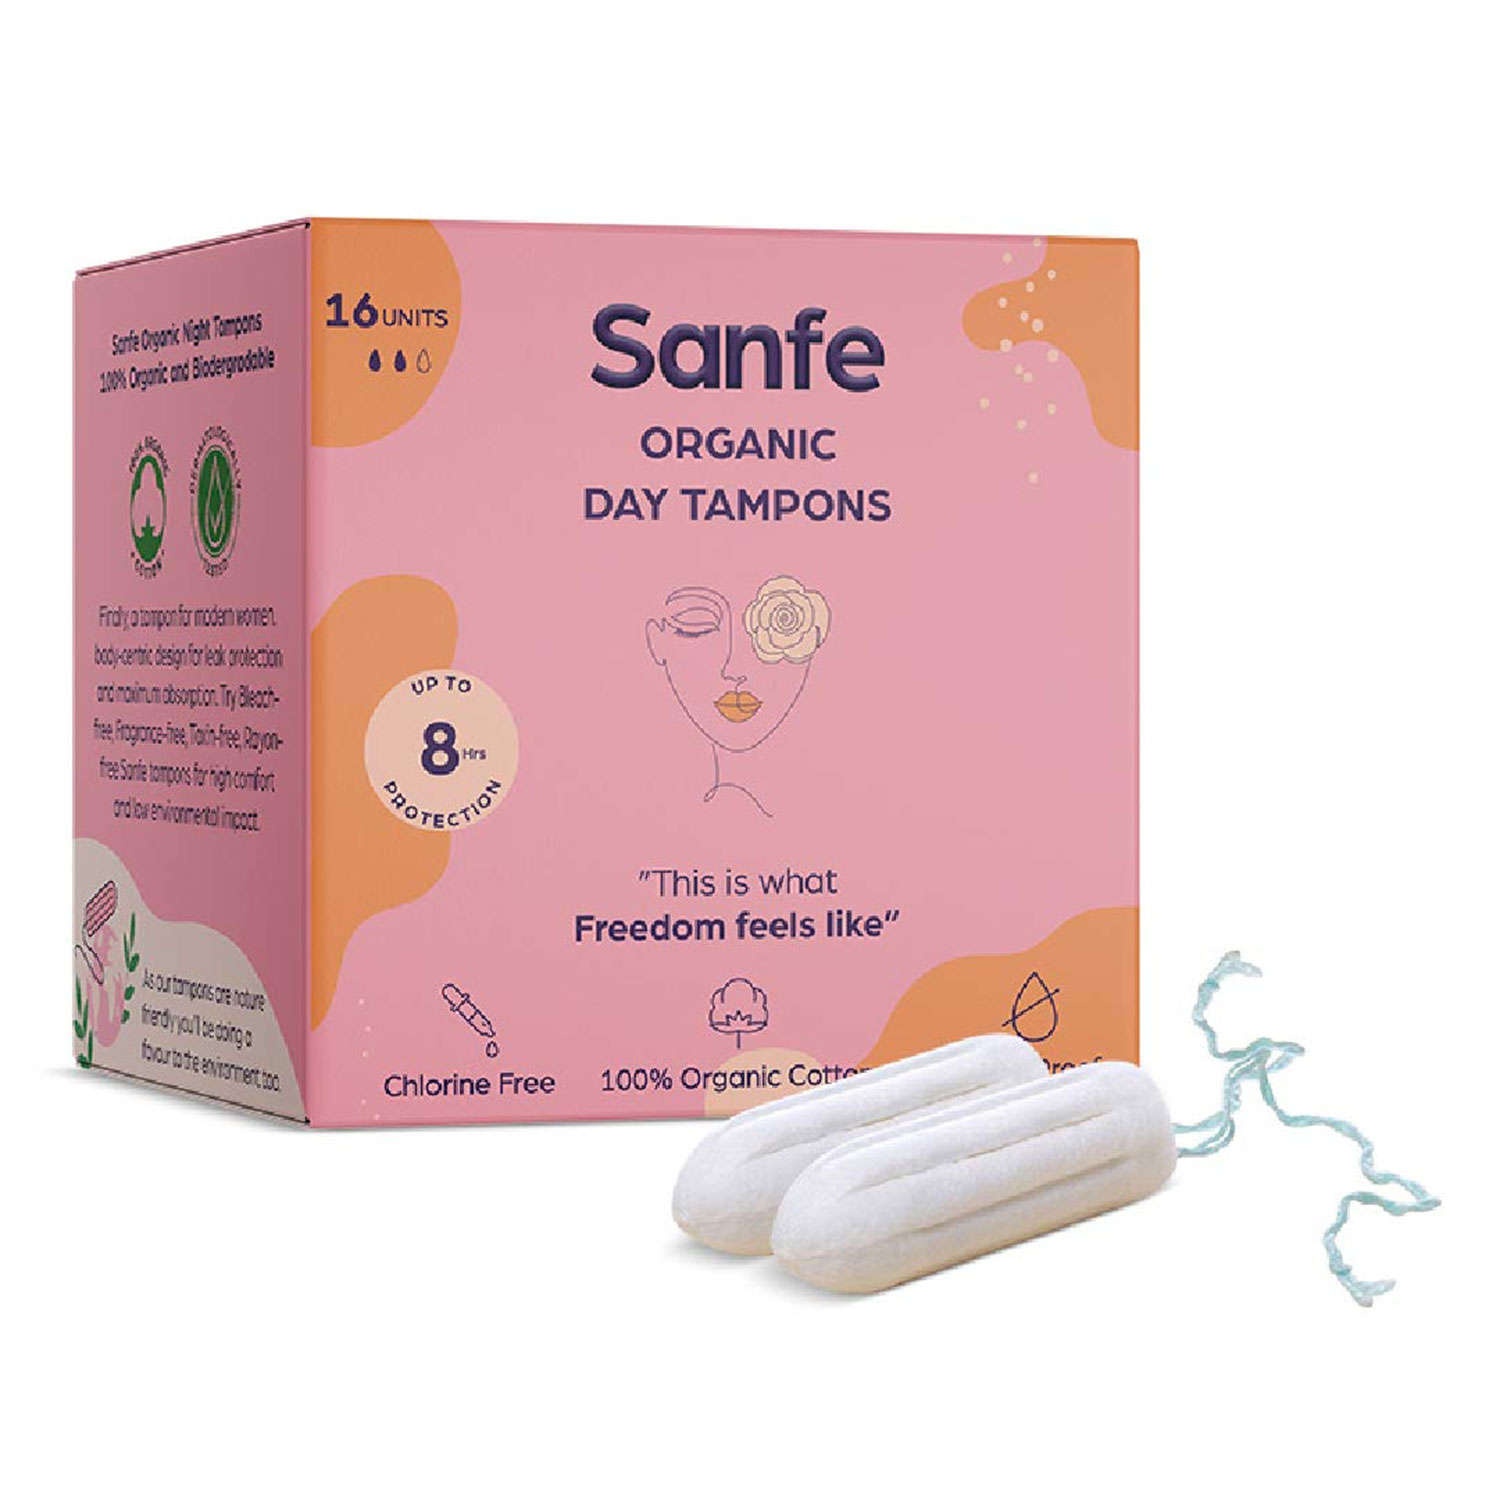 Sanfe Digital Tampons Day/Night, Pack Of 16 Each-Day